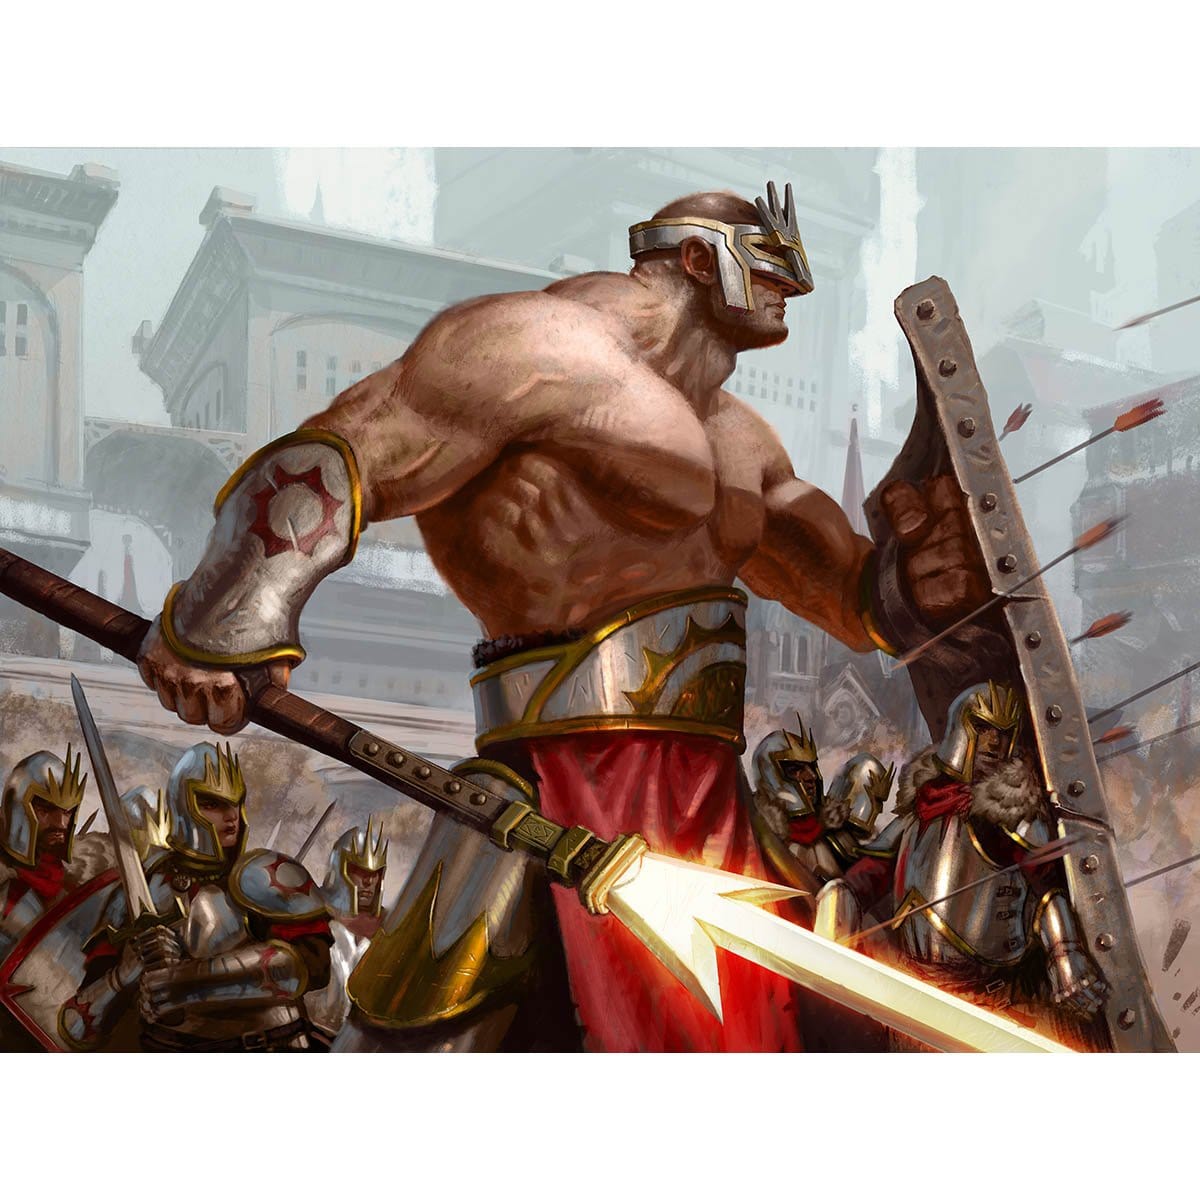 Swathcutter Giant Print - Print - Original Magic Art - Accessories for Magic the Gathering and other card games